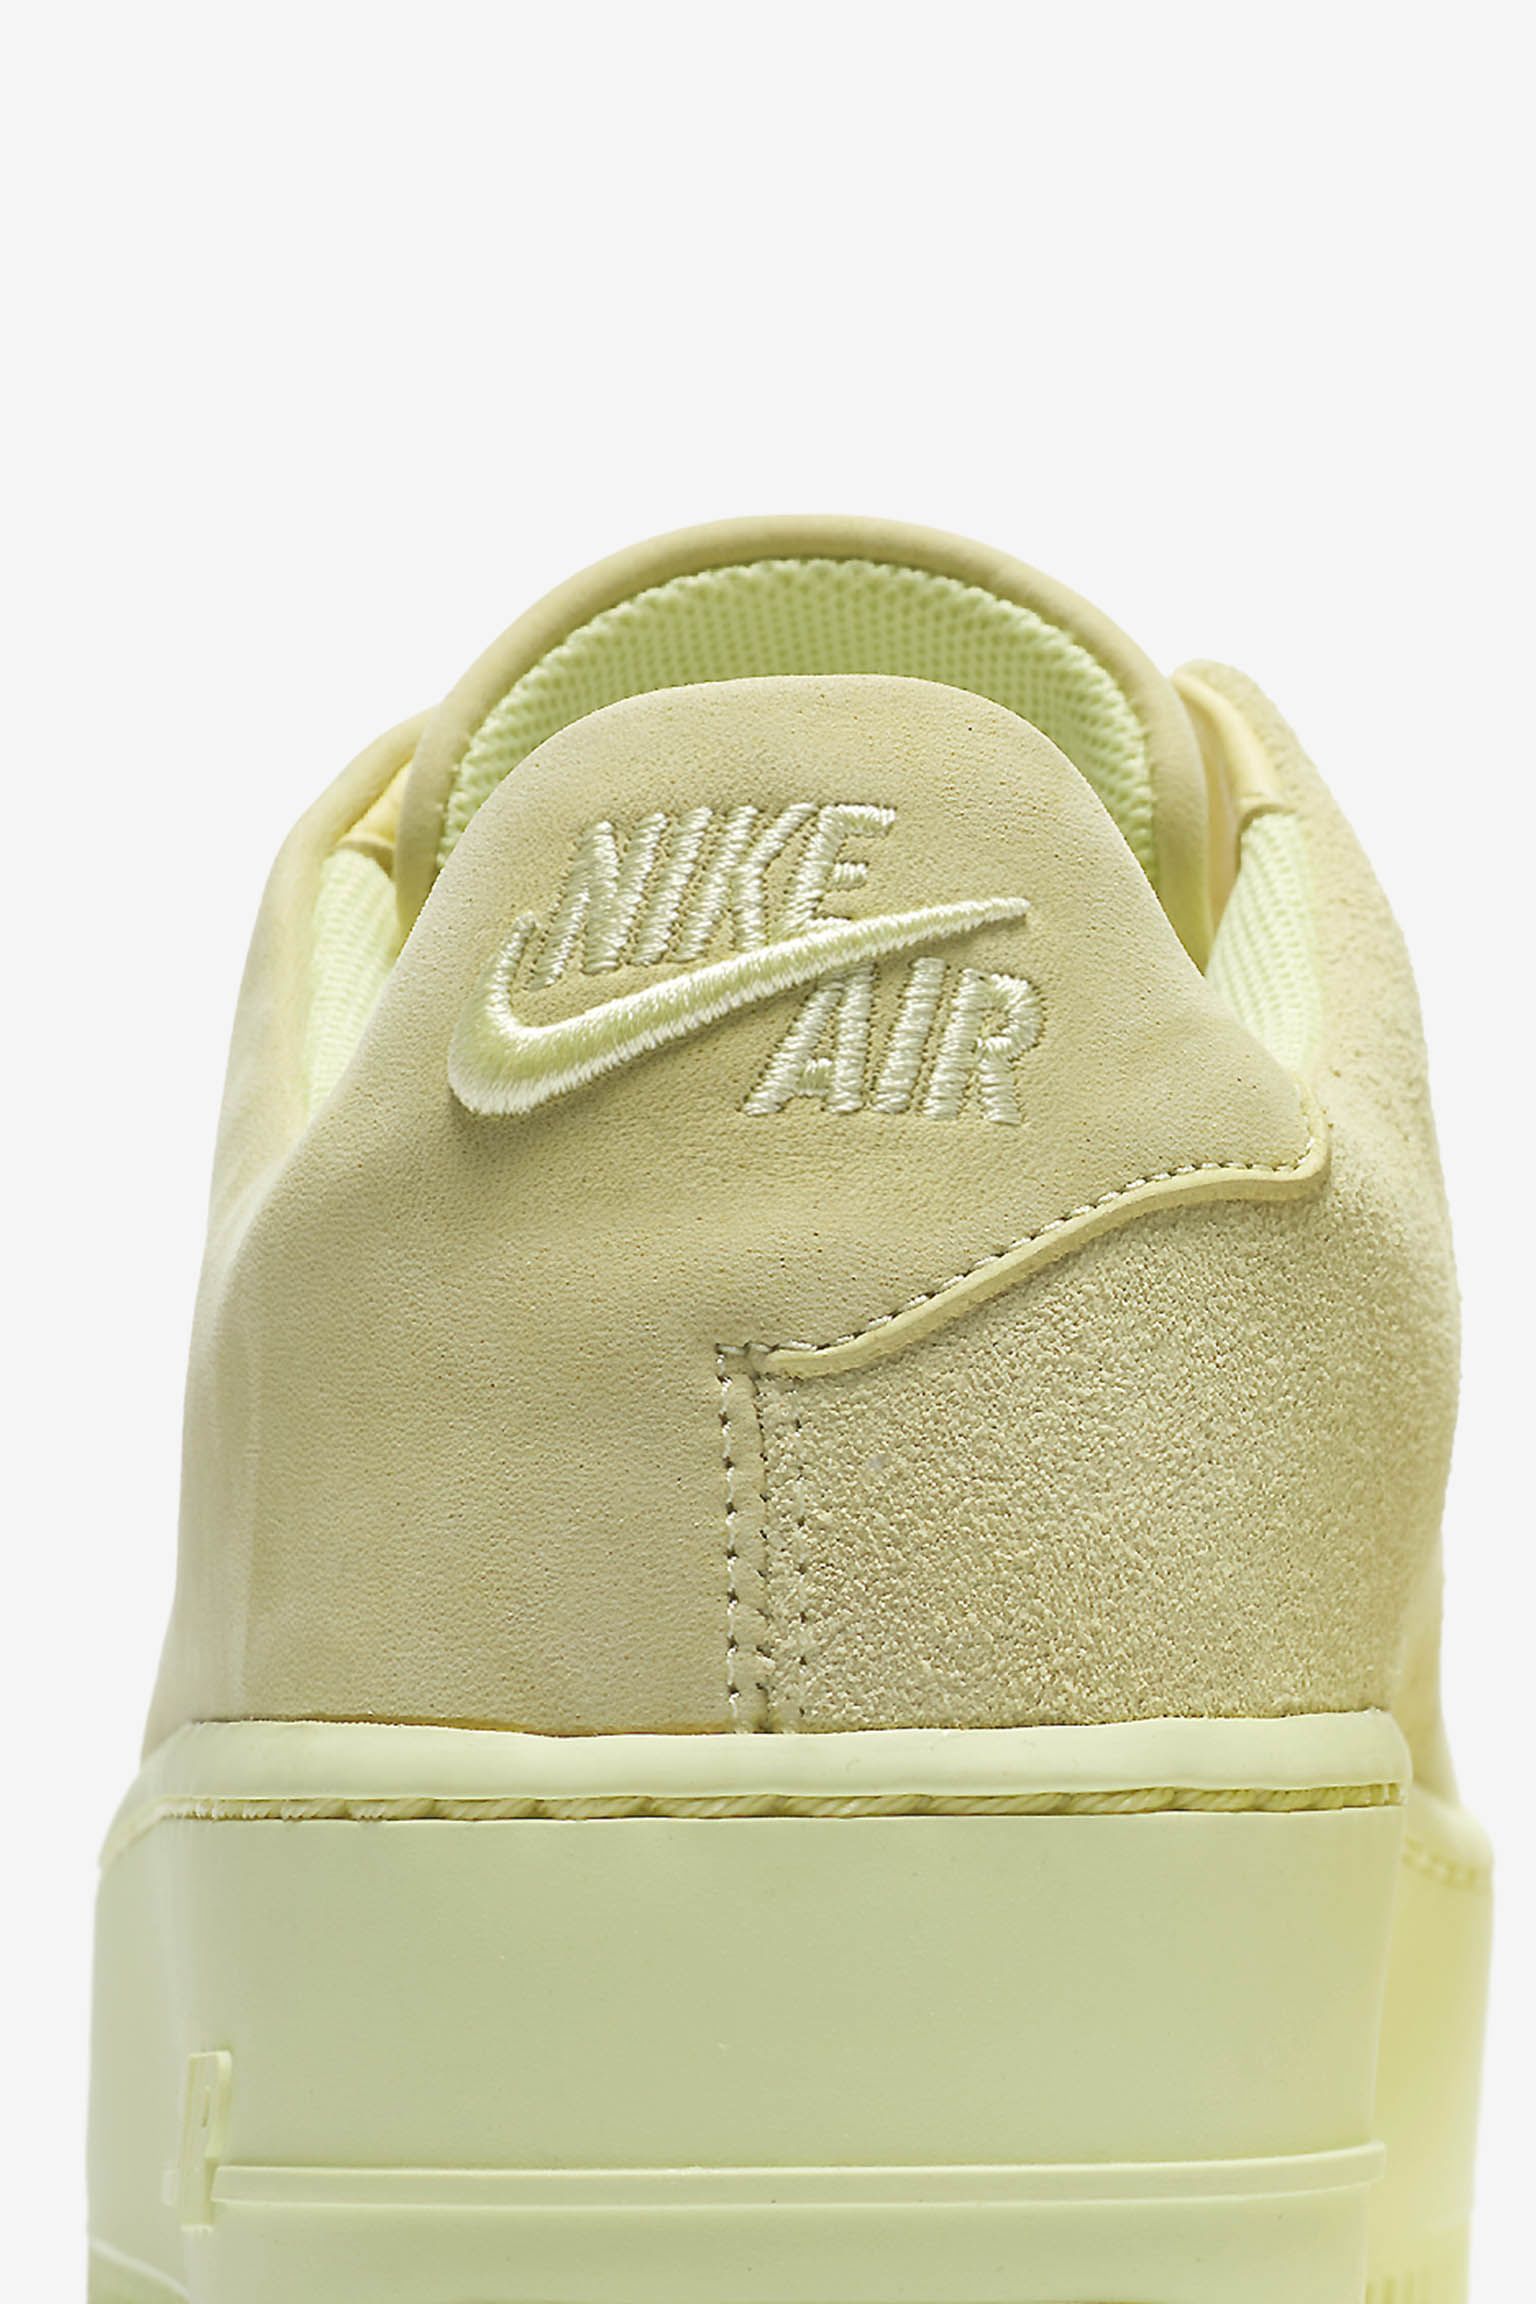 lime green air force ones